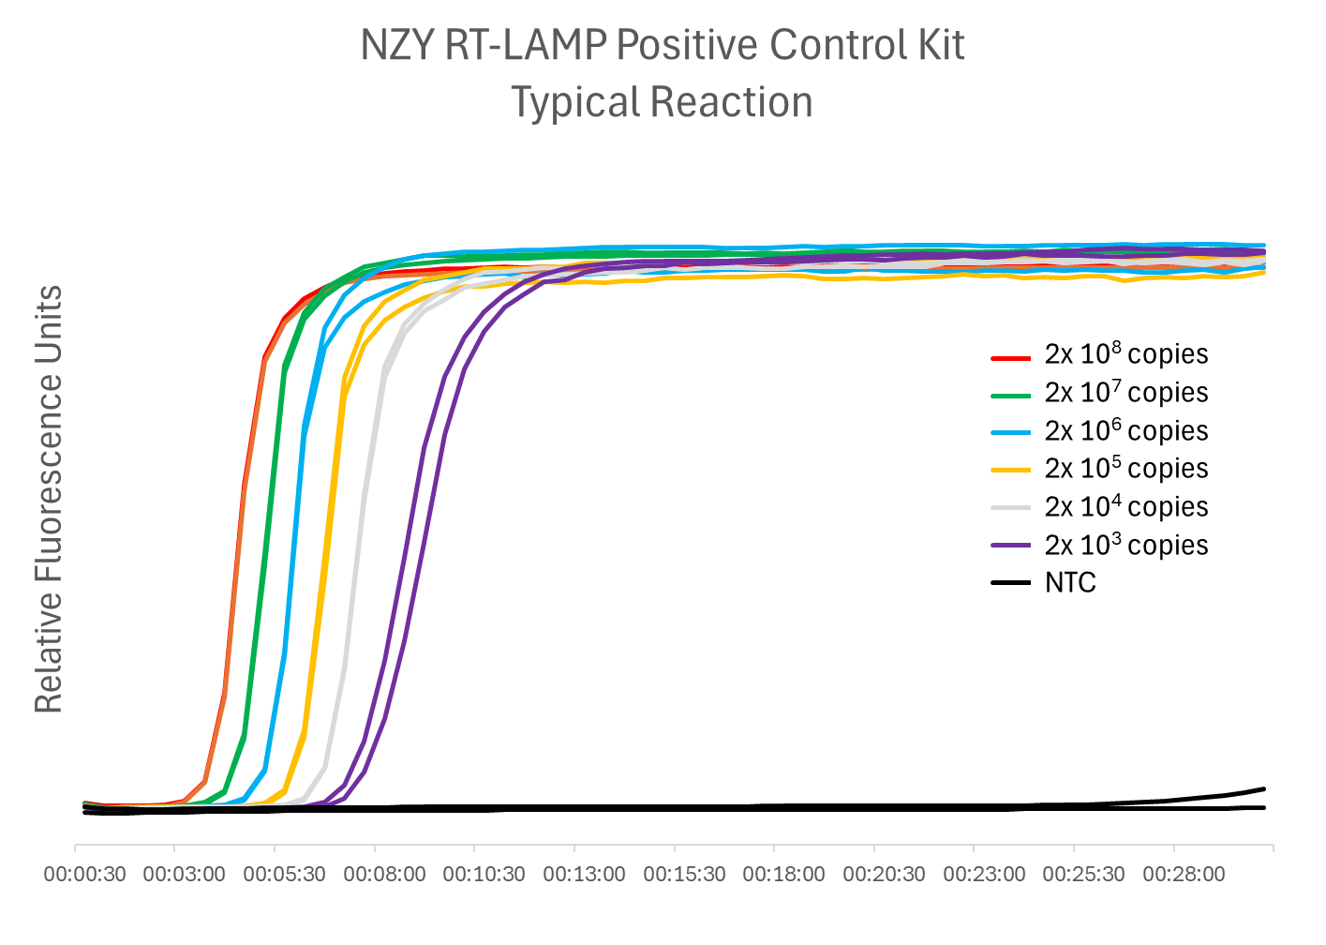 NZY Lam Positive Control Kit Typical Reaction